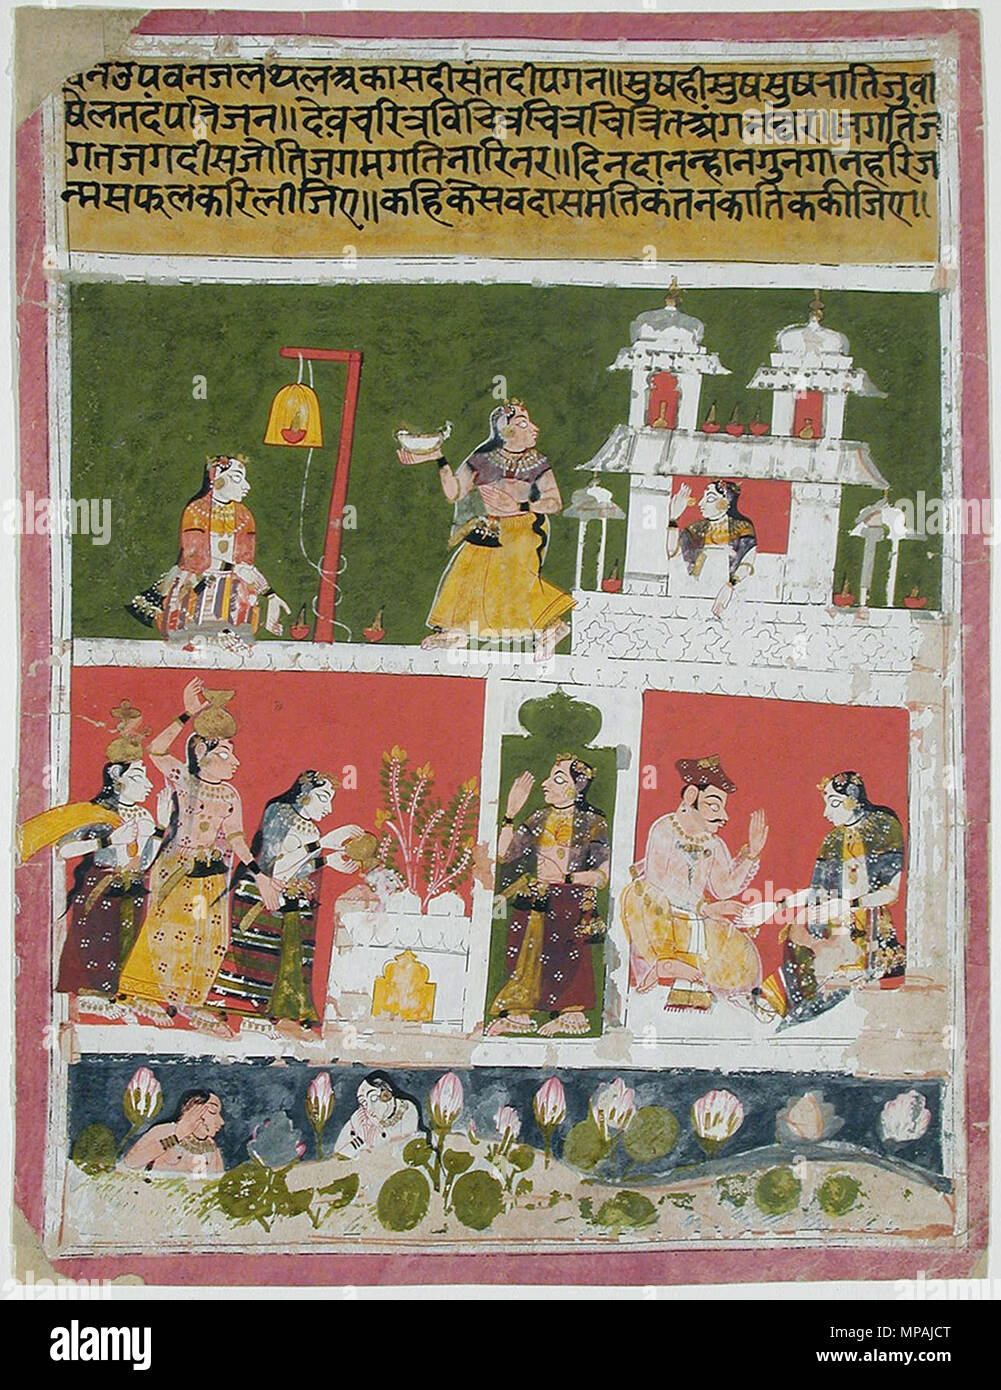 . English: Series Title: Connoisseur's Delight Suite Name: Raiskapriya Creation Date: ca. 1655 Display Dimensions: 9 13/32 in. x 7 1/4 in. (23.9 cm x 18.4 cm) Credit Line: Edwin Binney 3rd Collection Accession Number: 1990.960 Collection: <a href='http://www.sdmart.org/art/our-collection/asian-art' rel='nofollow'>The San Diego Museum of Art</a> . 15 October 2001, 09:56:49. English: thesandiegomuseumofartcollection 1177 The lovers converse and the sakhis water the tulsi bush (6125116662) Stock Photo